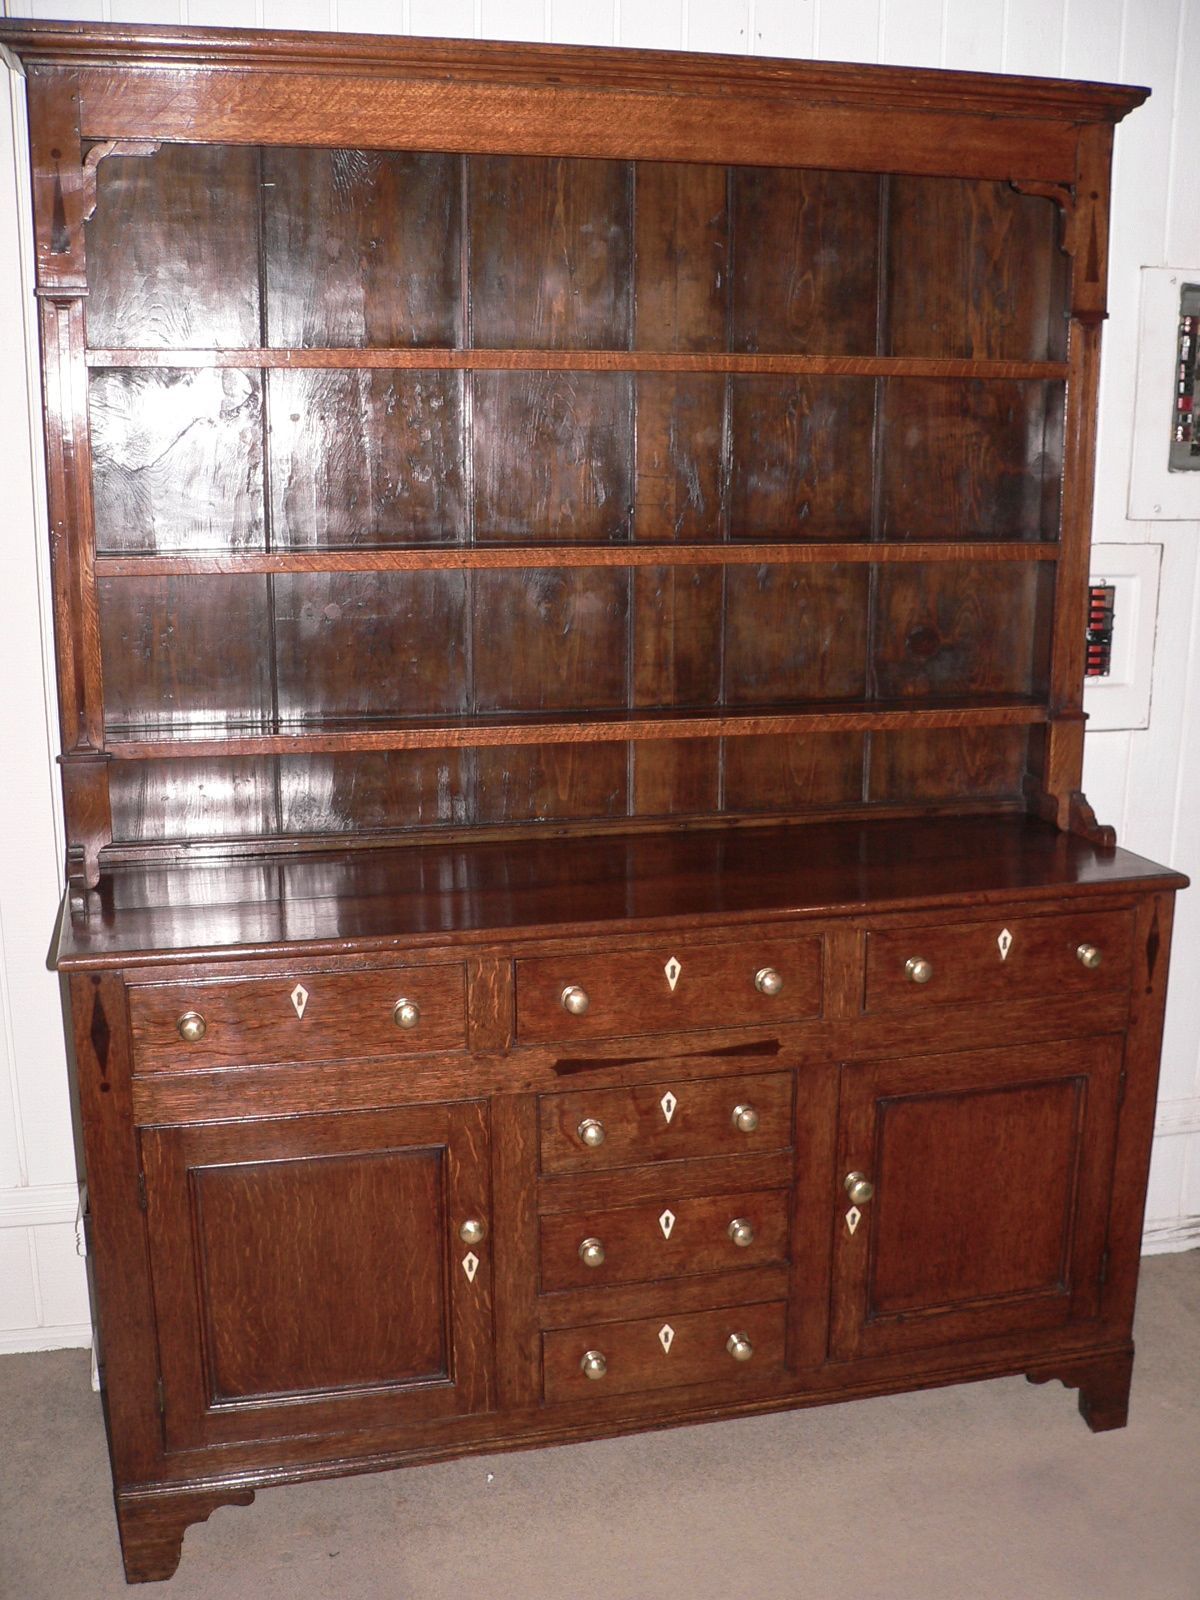 This classic North Wales dresser was made about 1850 and is in superb condition. The pine backboards are original to the dresser and the pine sides still have their original faux oak paint finish. The dresser is inlaid with ebony and has the